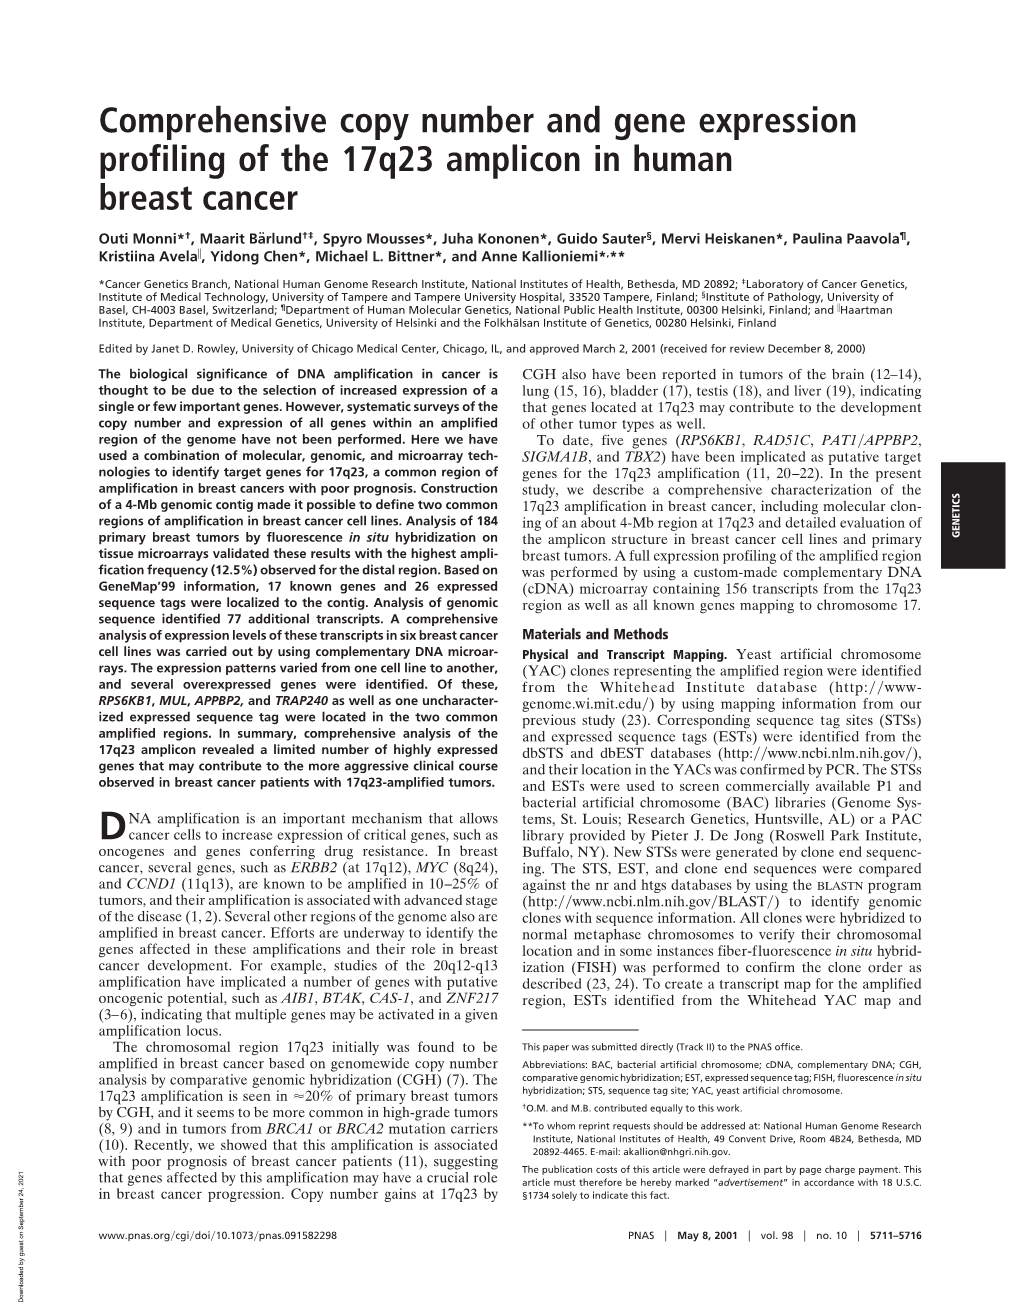 Comprehensive Copy Number and Gene Expression Profiling of the 17Q23 Amplicon in Human Breast Cancer